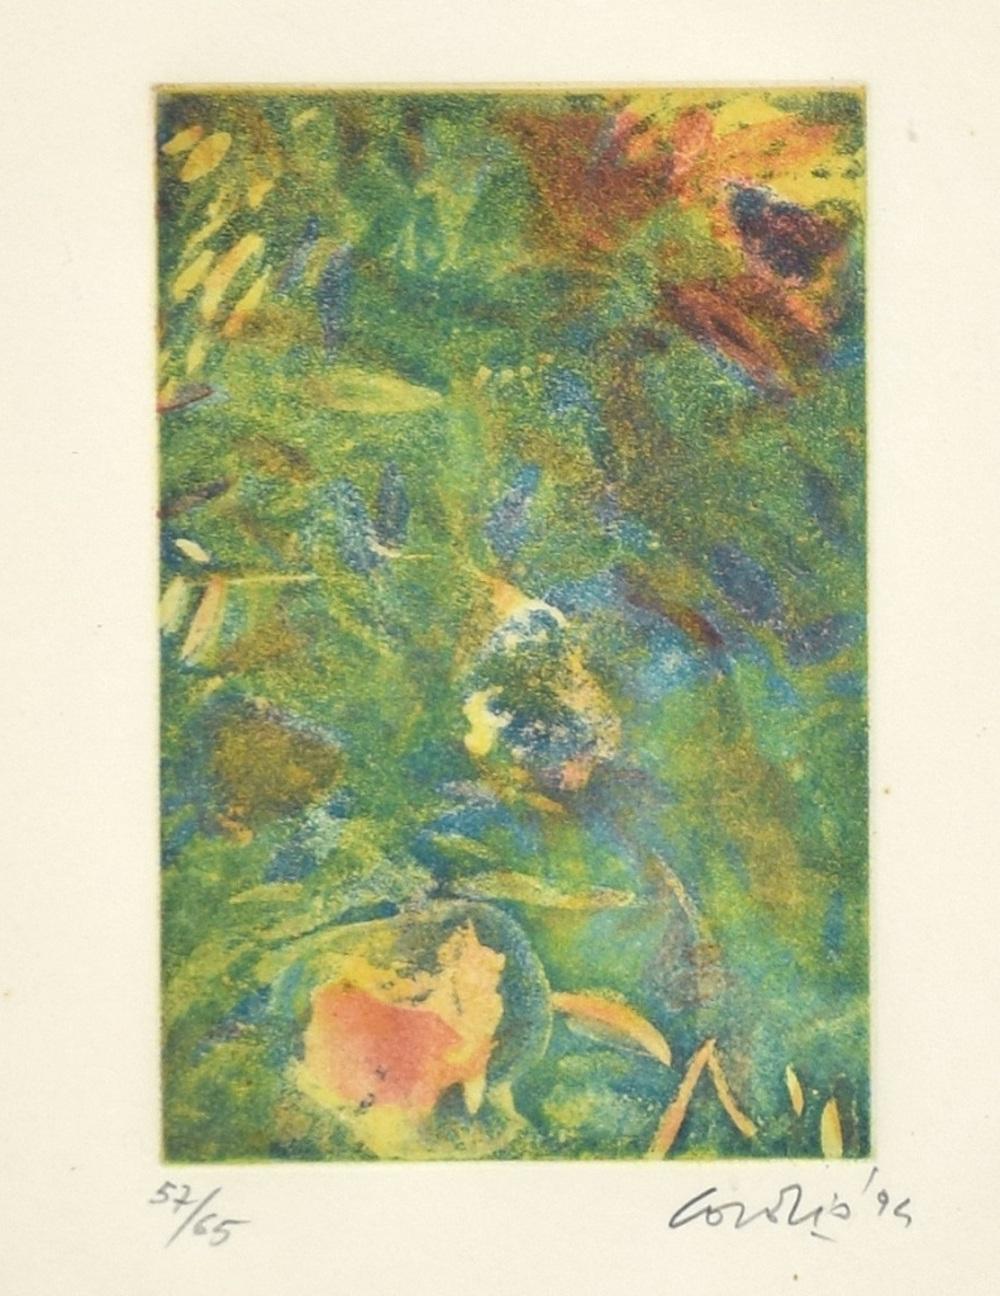 Image dimensions: 14.7 x 10 cm.

Green Composition is an original mixed colored etching realized by Nino Cordio in 1995.

Hand signed and dated on the lower right margin. 

Numbered on the lower left margin. Ed. 57/65.

Nino Cordio (Santa Ninfa, 10